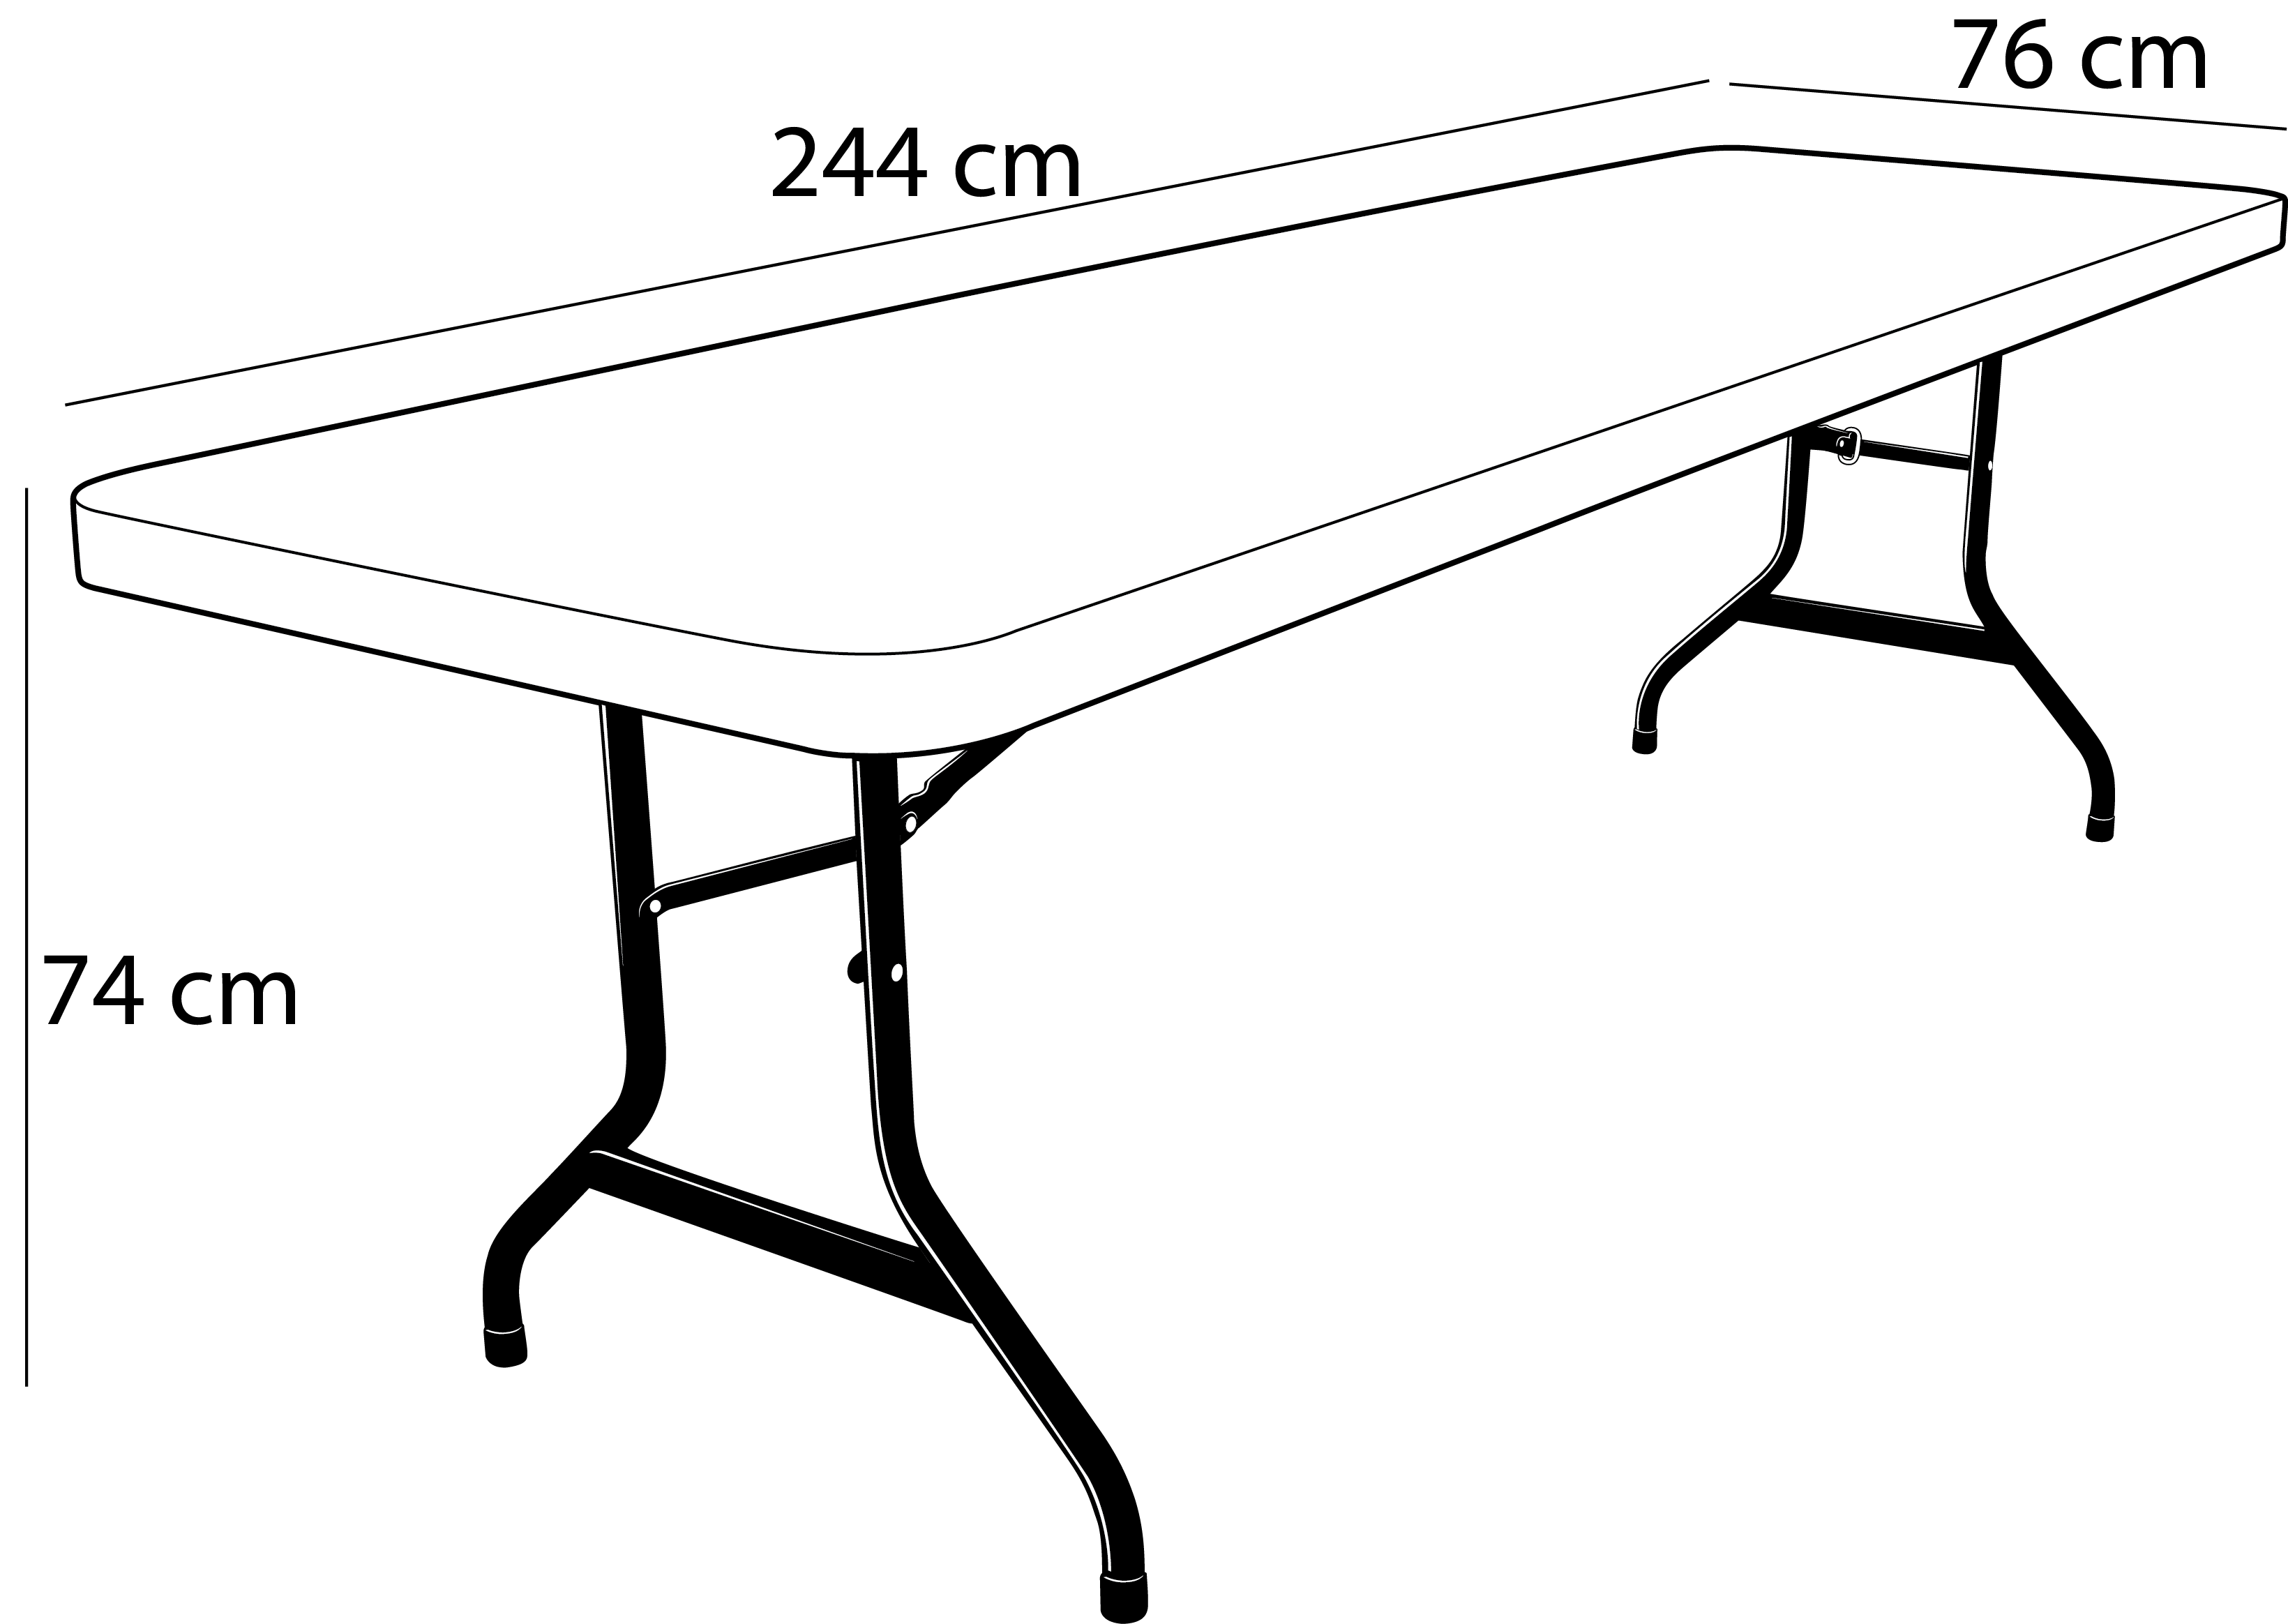 8ft Rectangular folding table 244cm / 10 people / heavy commercial